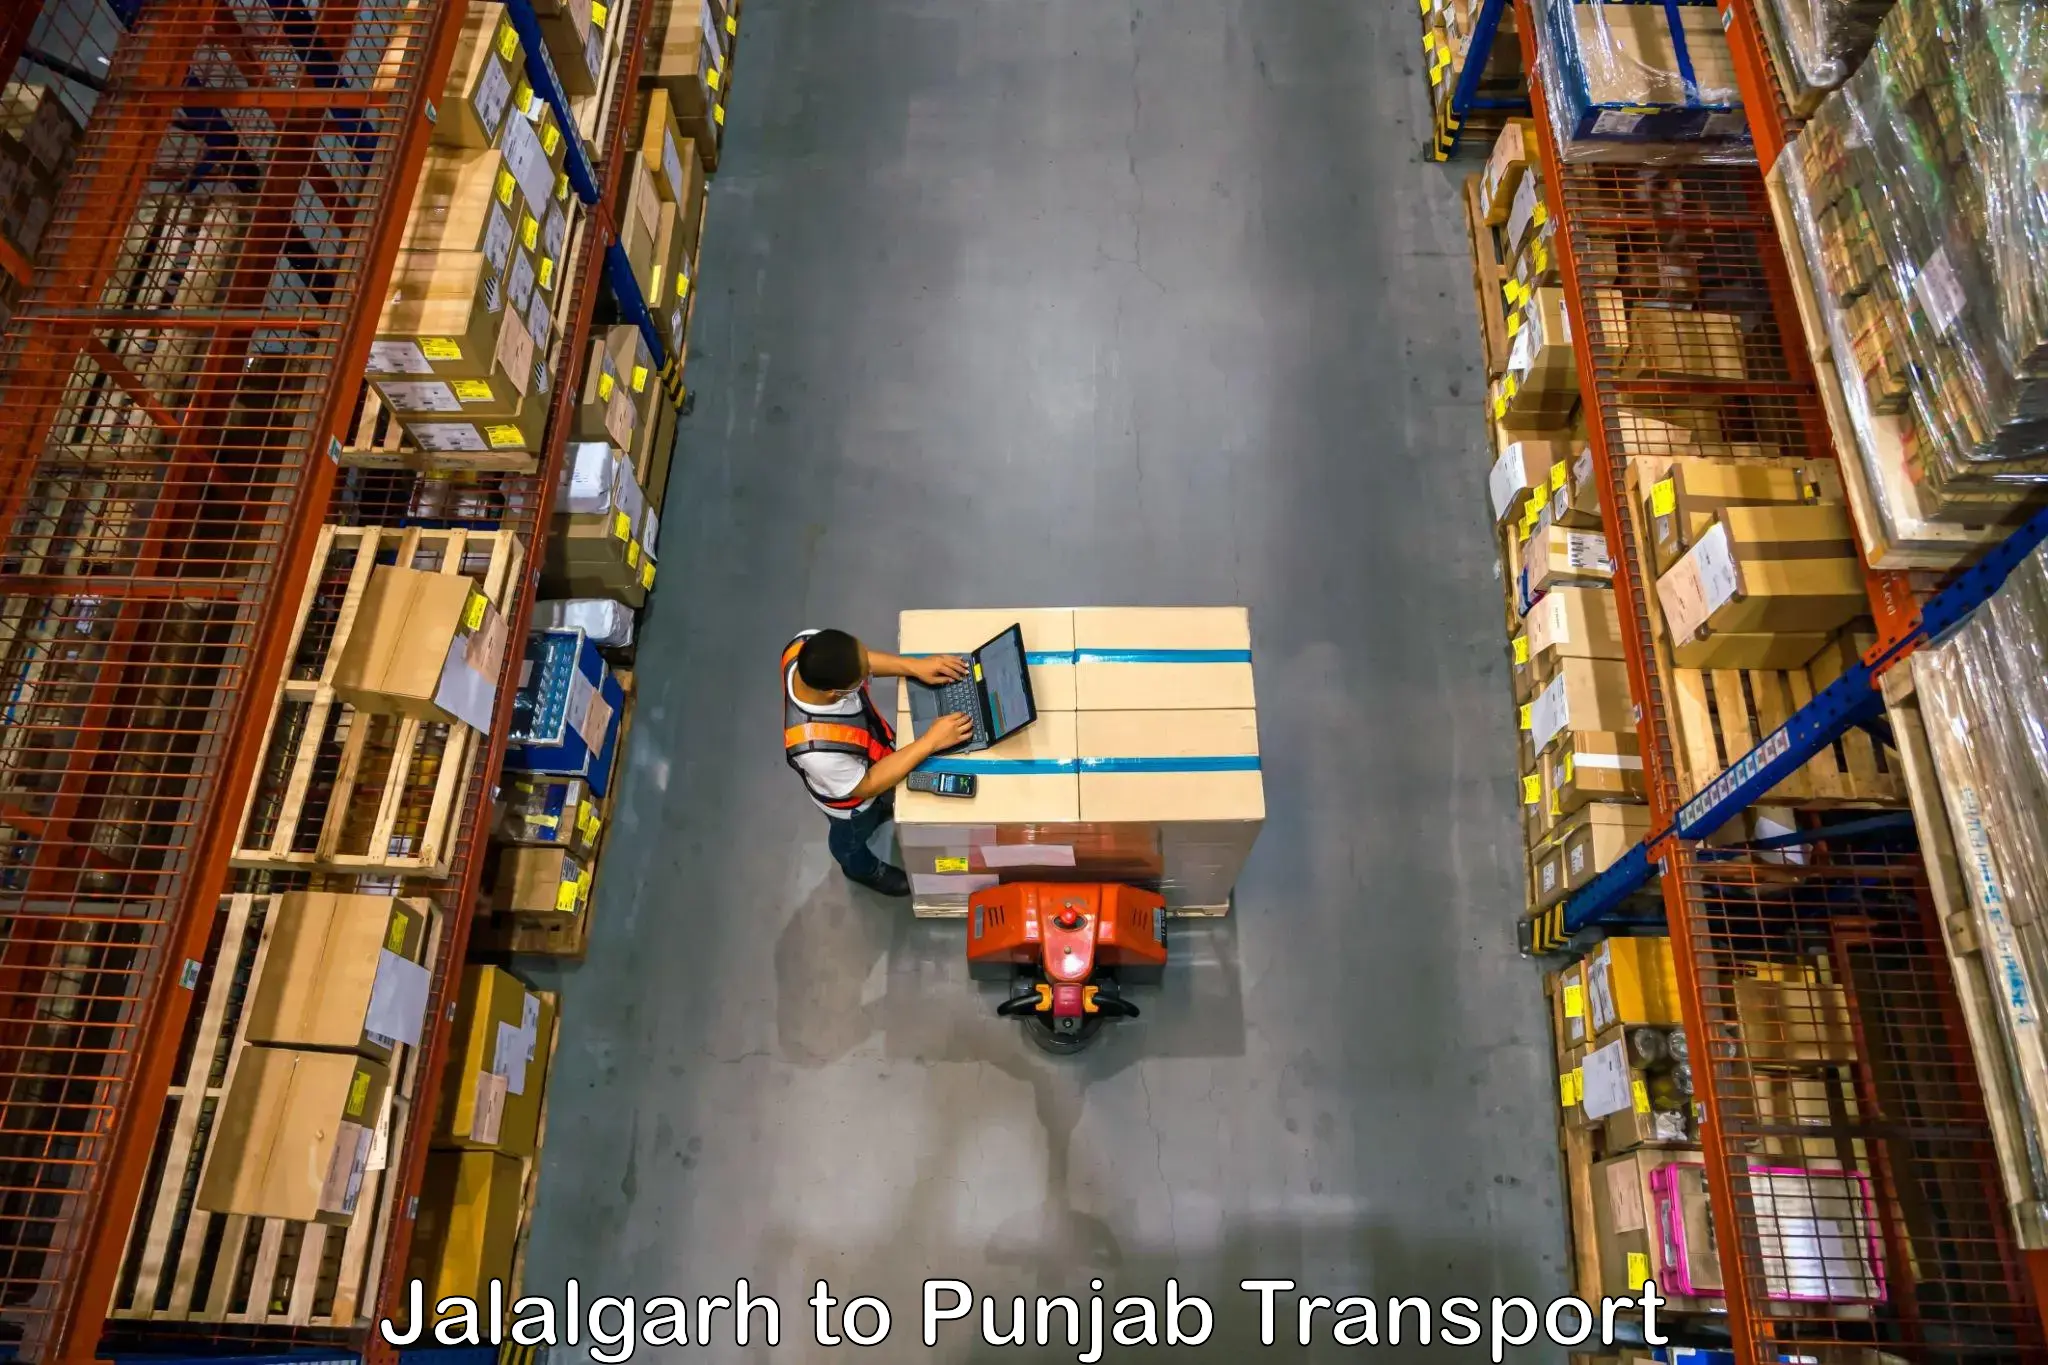 Road transport services in Jalalgarh to Beas